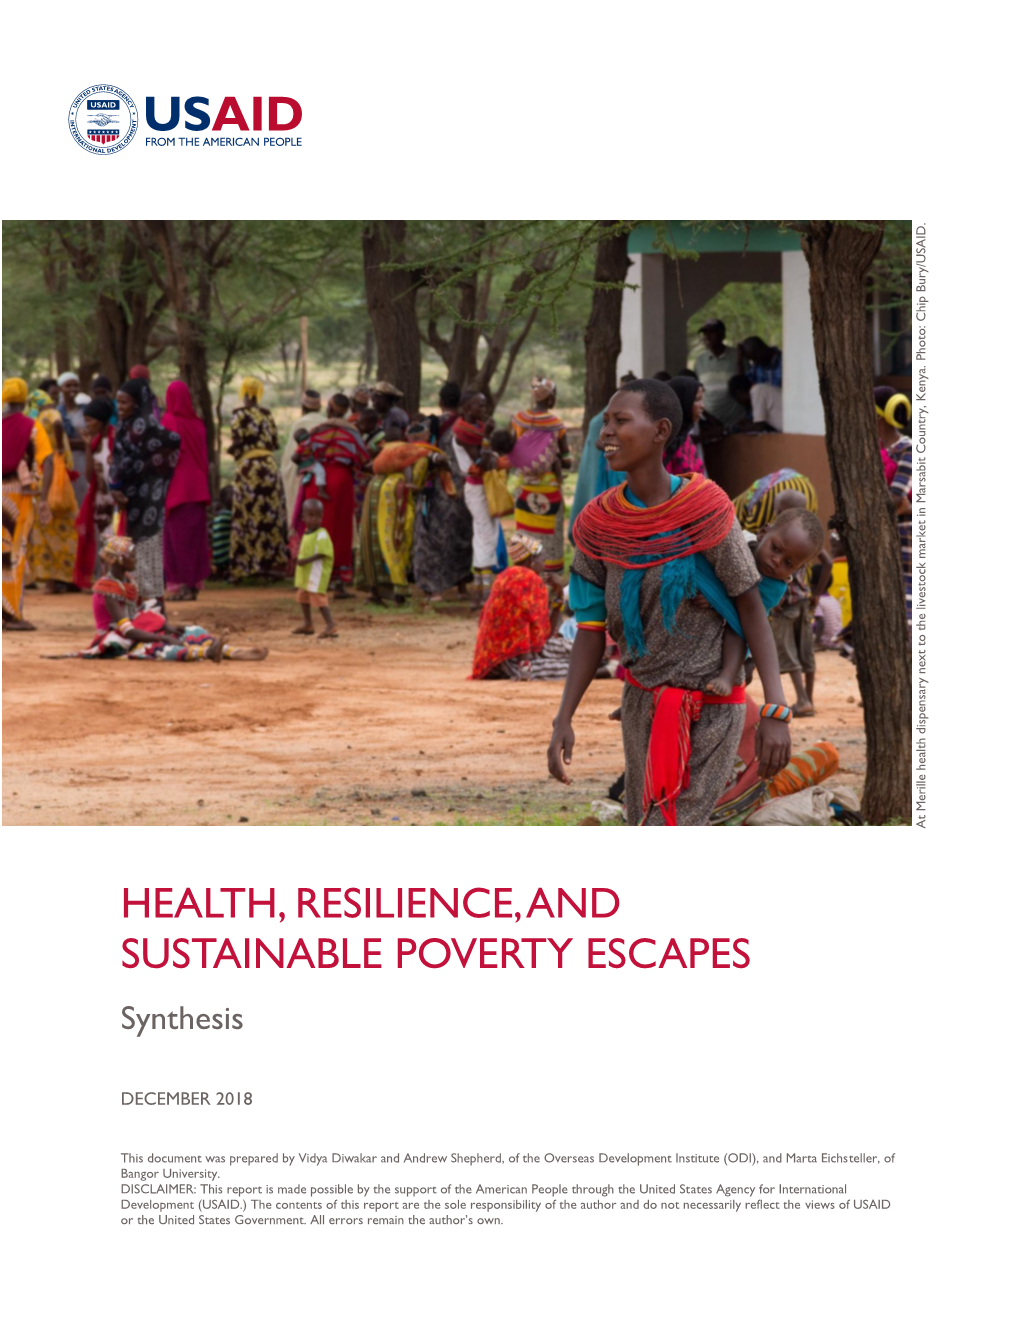 HEALTH, RESILIENCE, and SUSTAINABLE POVERTY ESCAPES Synthesis